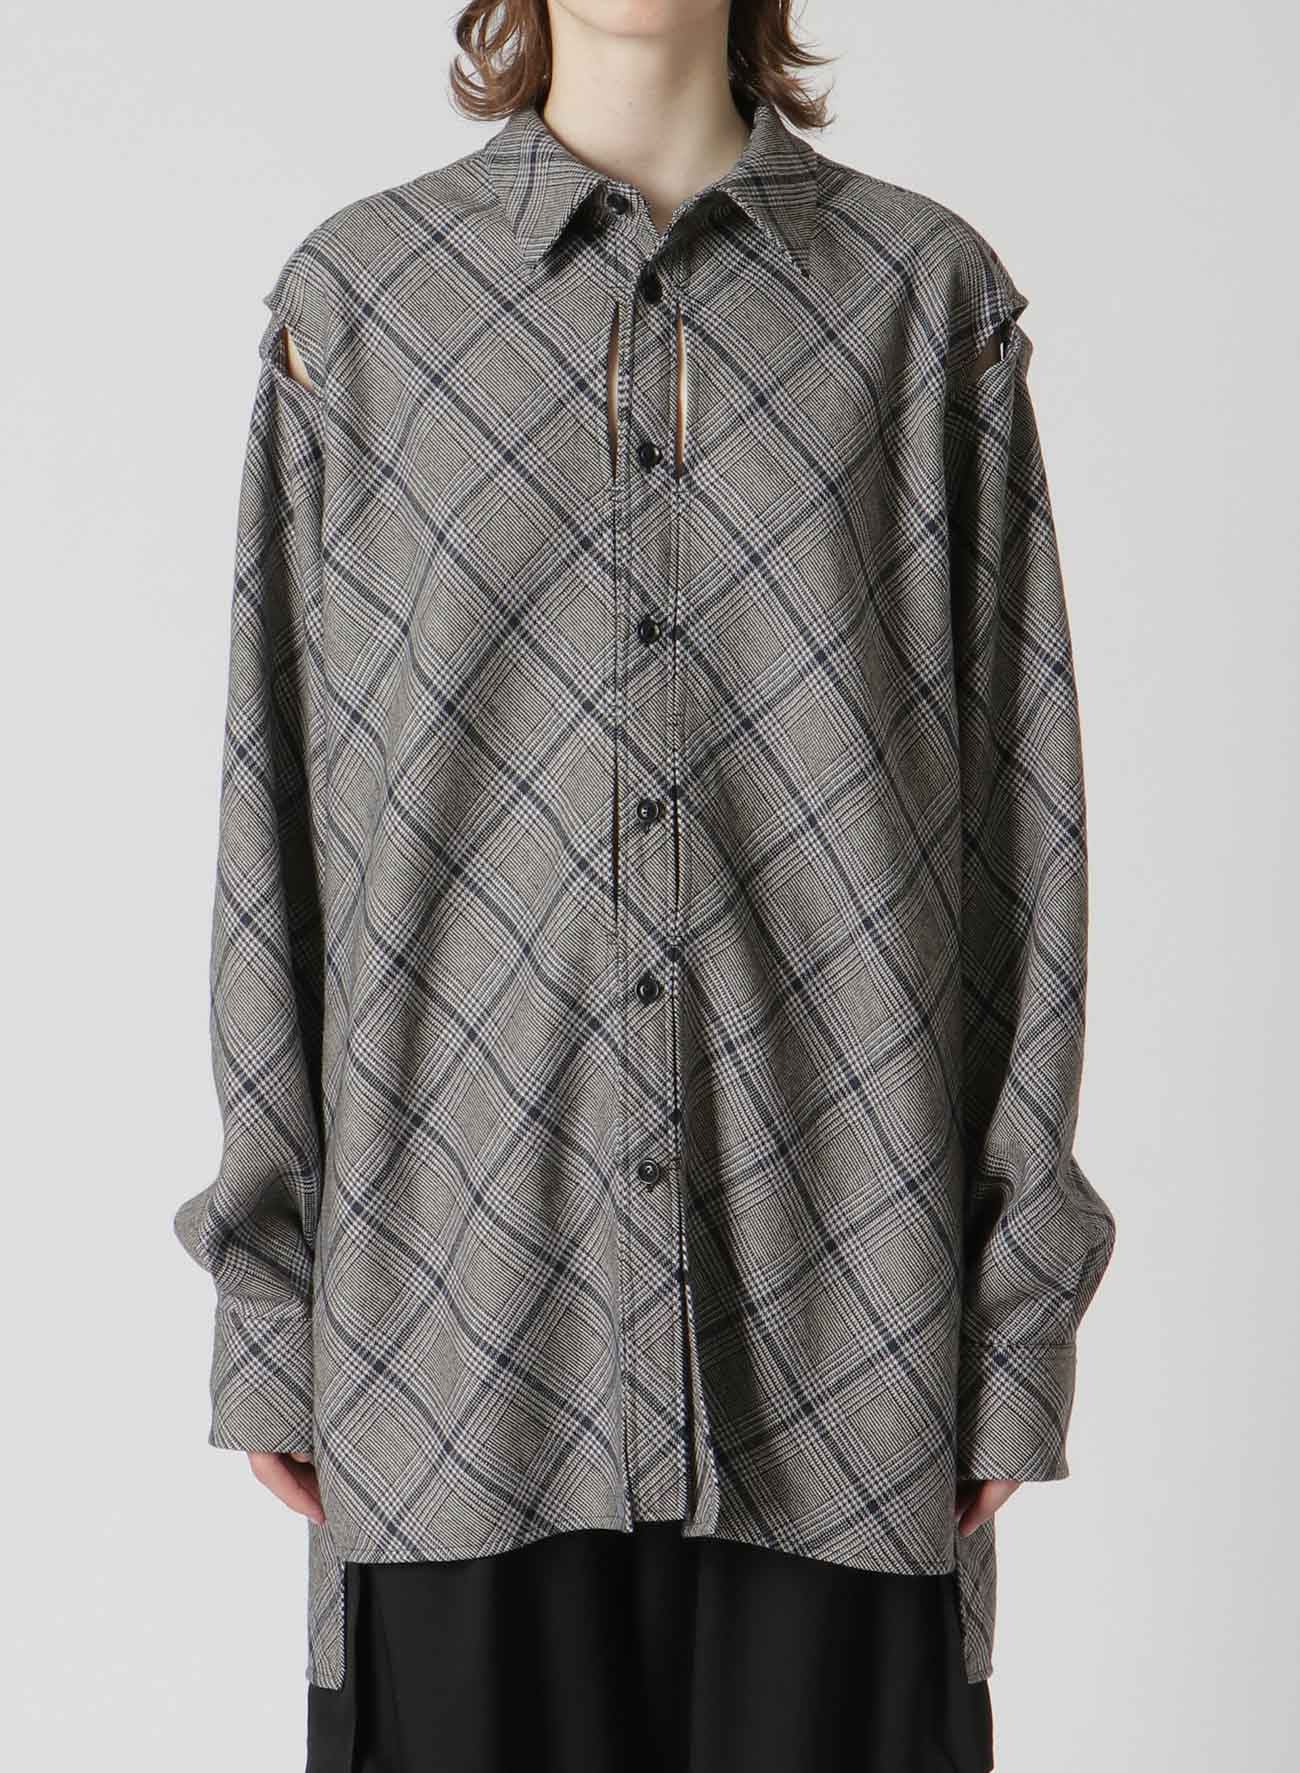 WOOL HOUNDSTOOTH CHECK DECONSTRUCTED SLEEVE DETAIL SHIRT